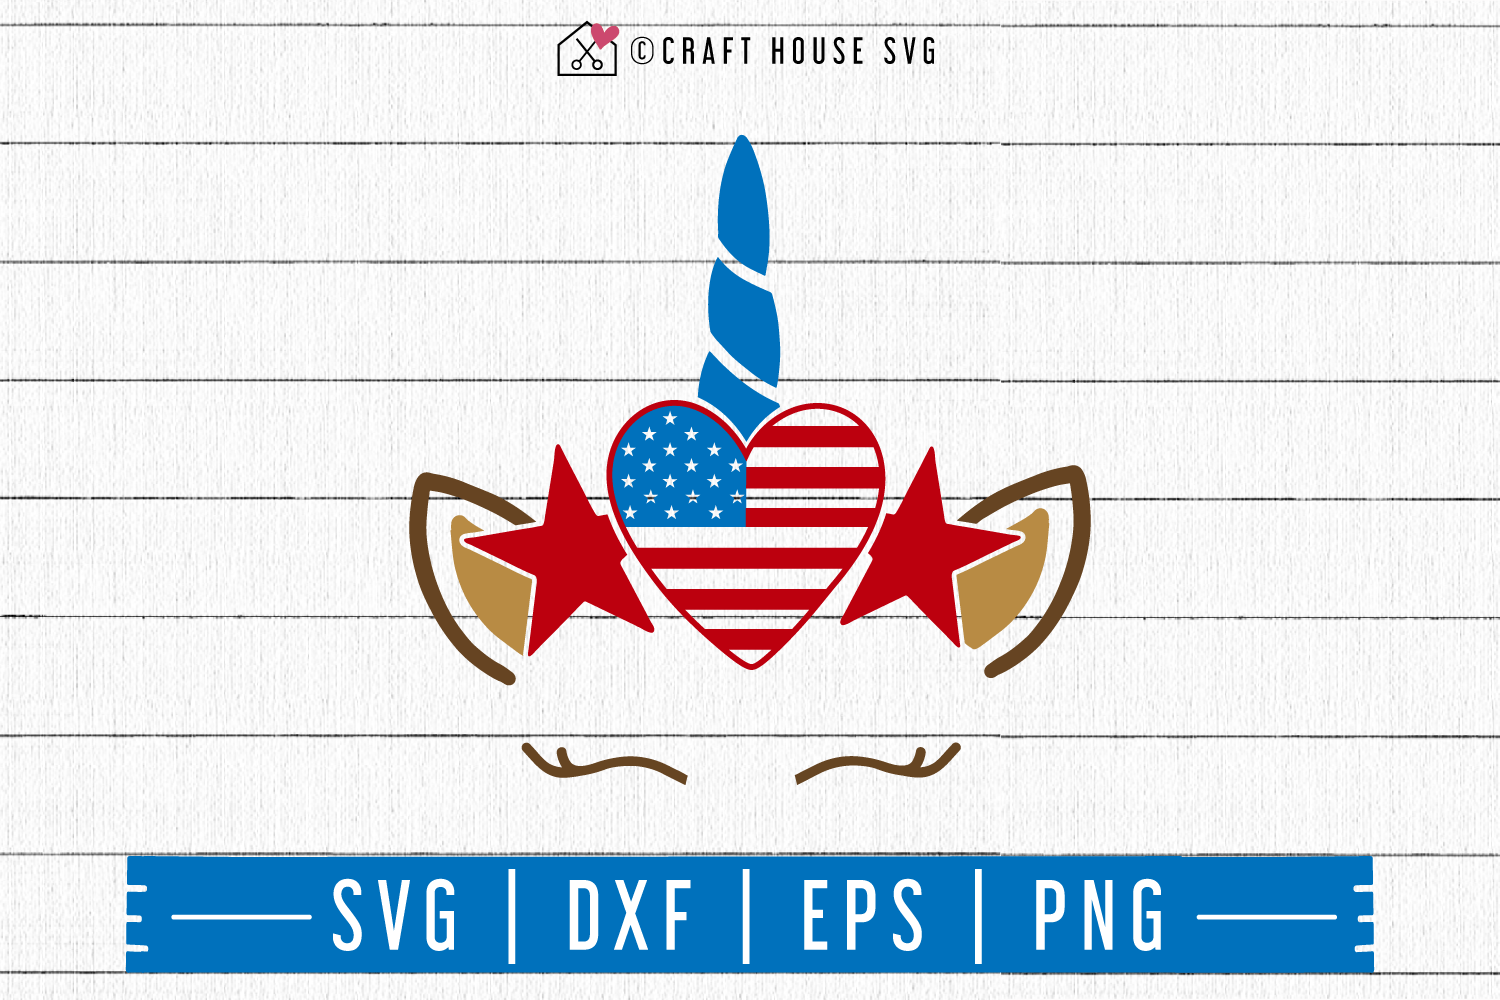 4th of July SVG file | Heart American Flag Unicorn SVG Craft House SVG - SVG files for Cricut and Silhouette